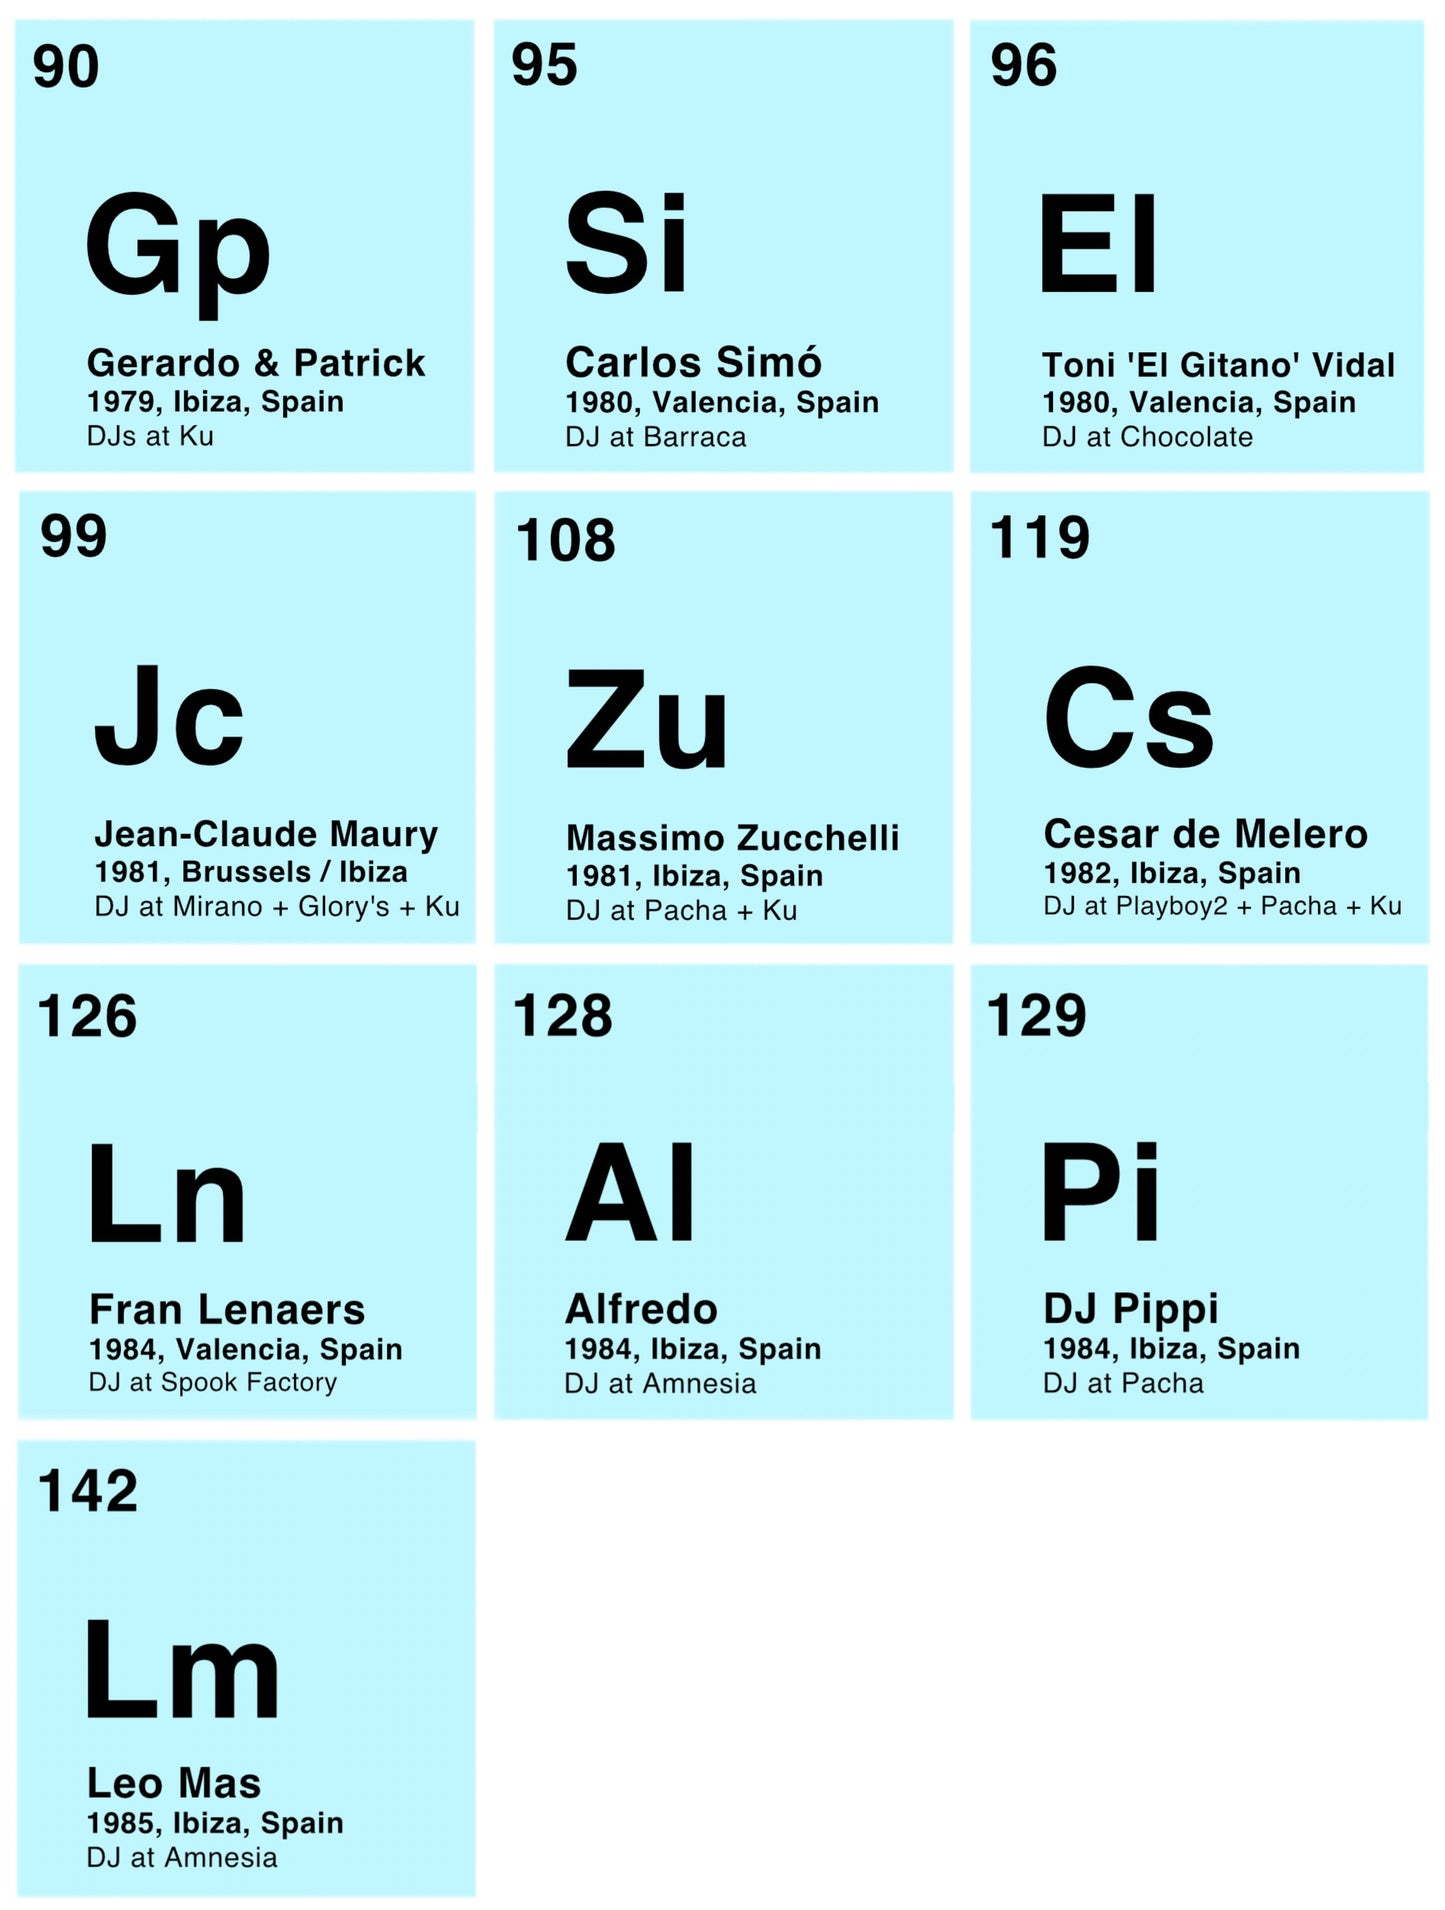 Periodic Table Of The DJ (A1), 2021